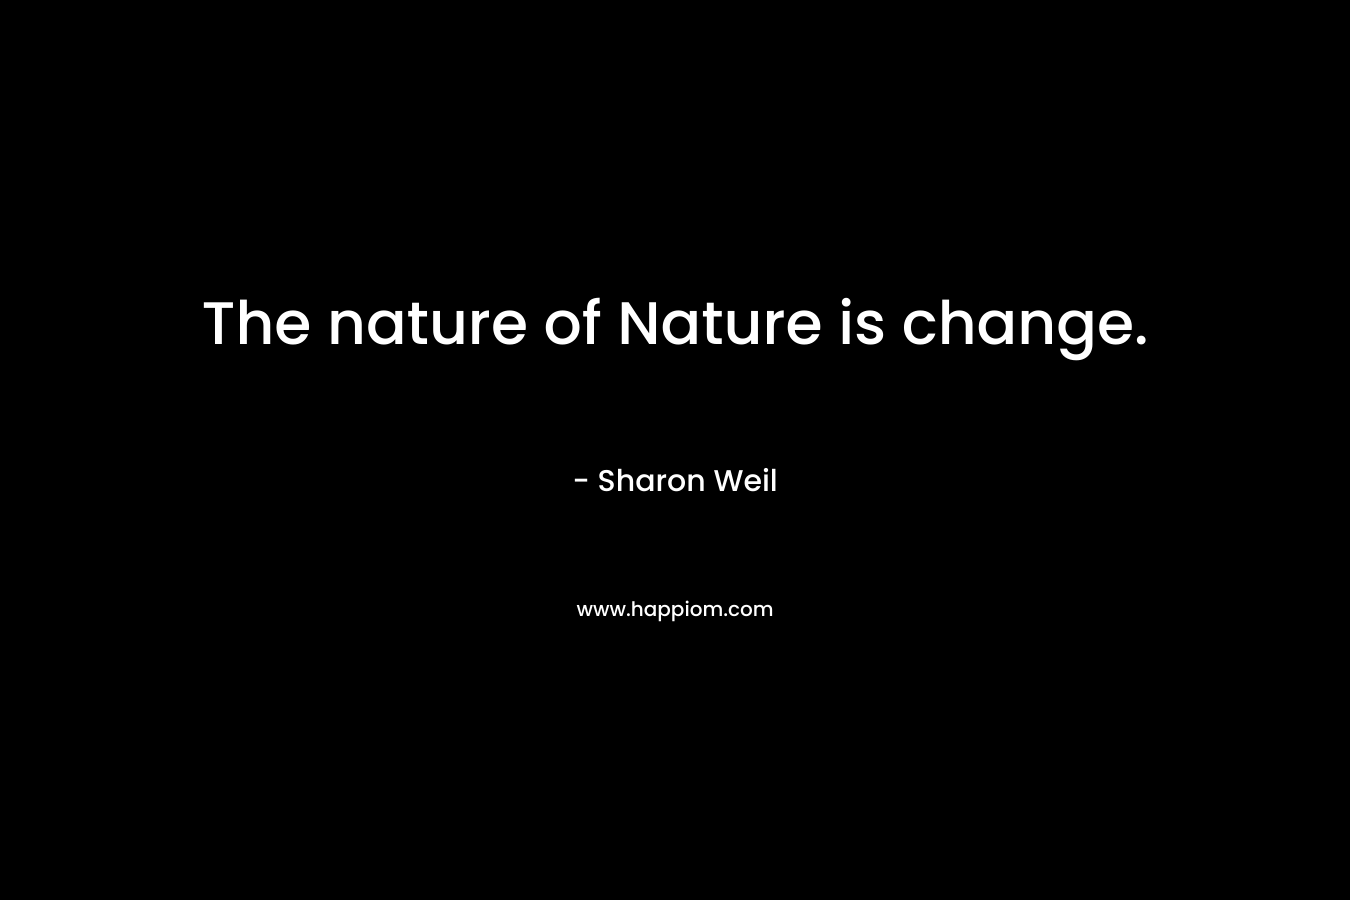 The nature of Nature is change. – Sharon Weil